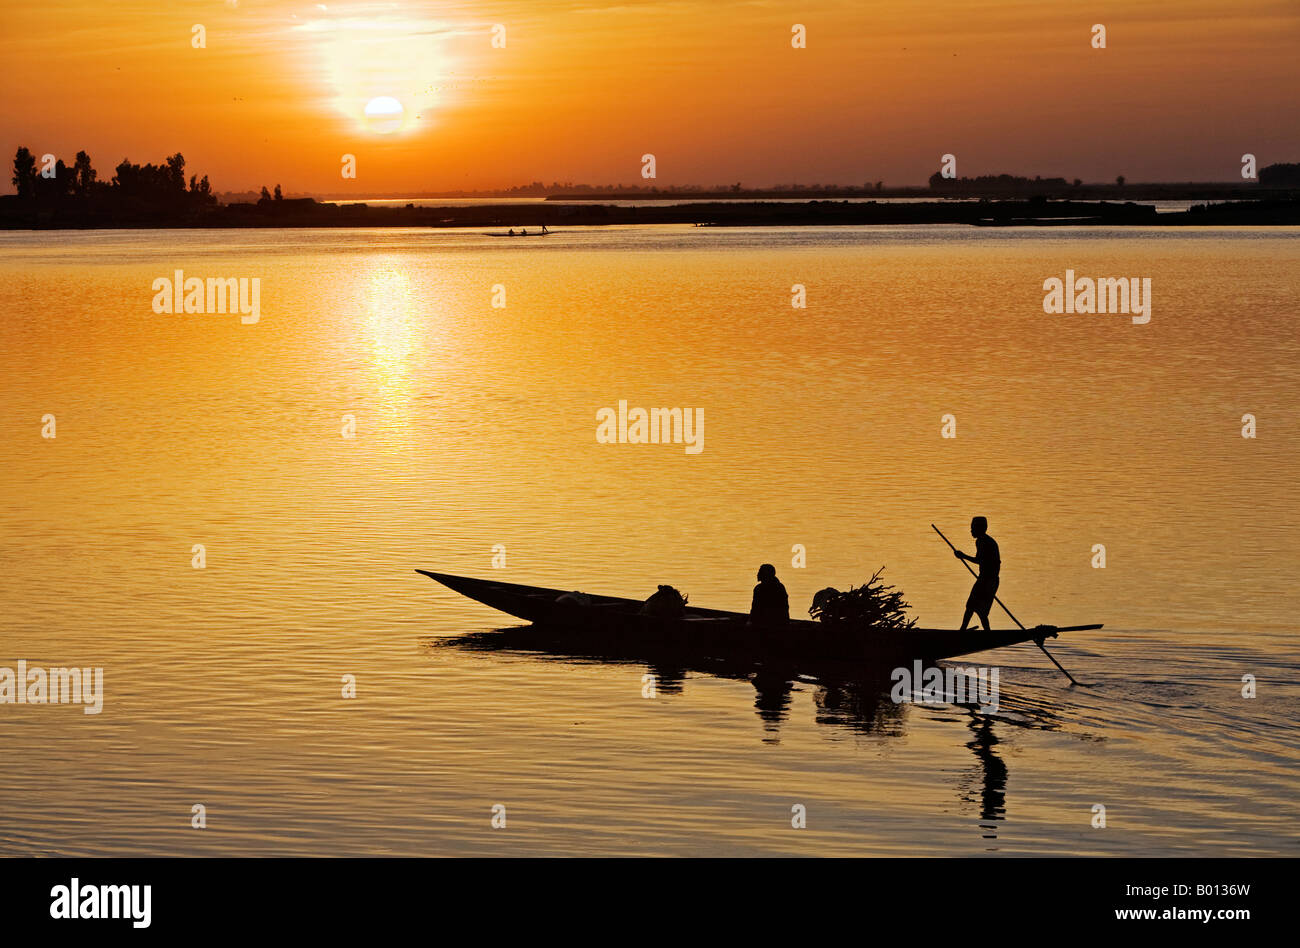 Mali, Mopti. At sunset, a boatman in a pirogue ferries passengers across the Niger River to Mopti. Stock Photo